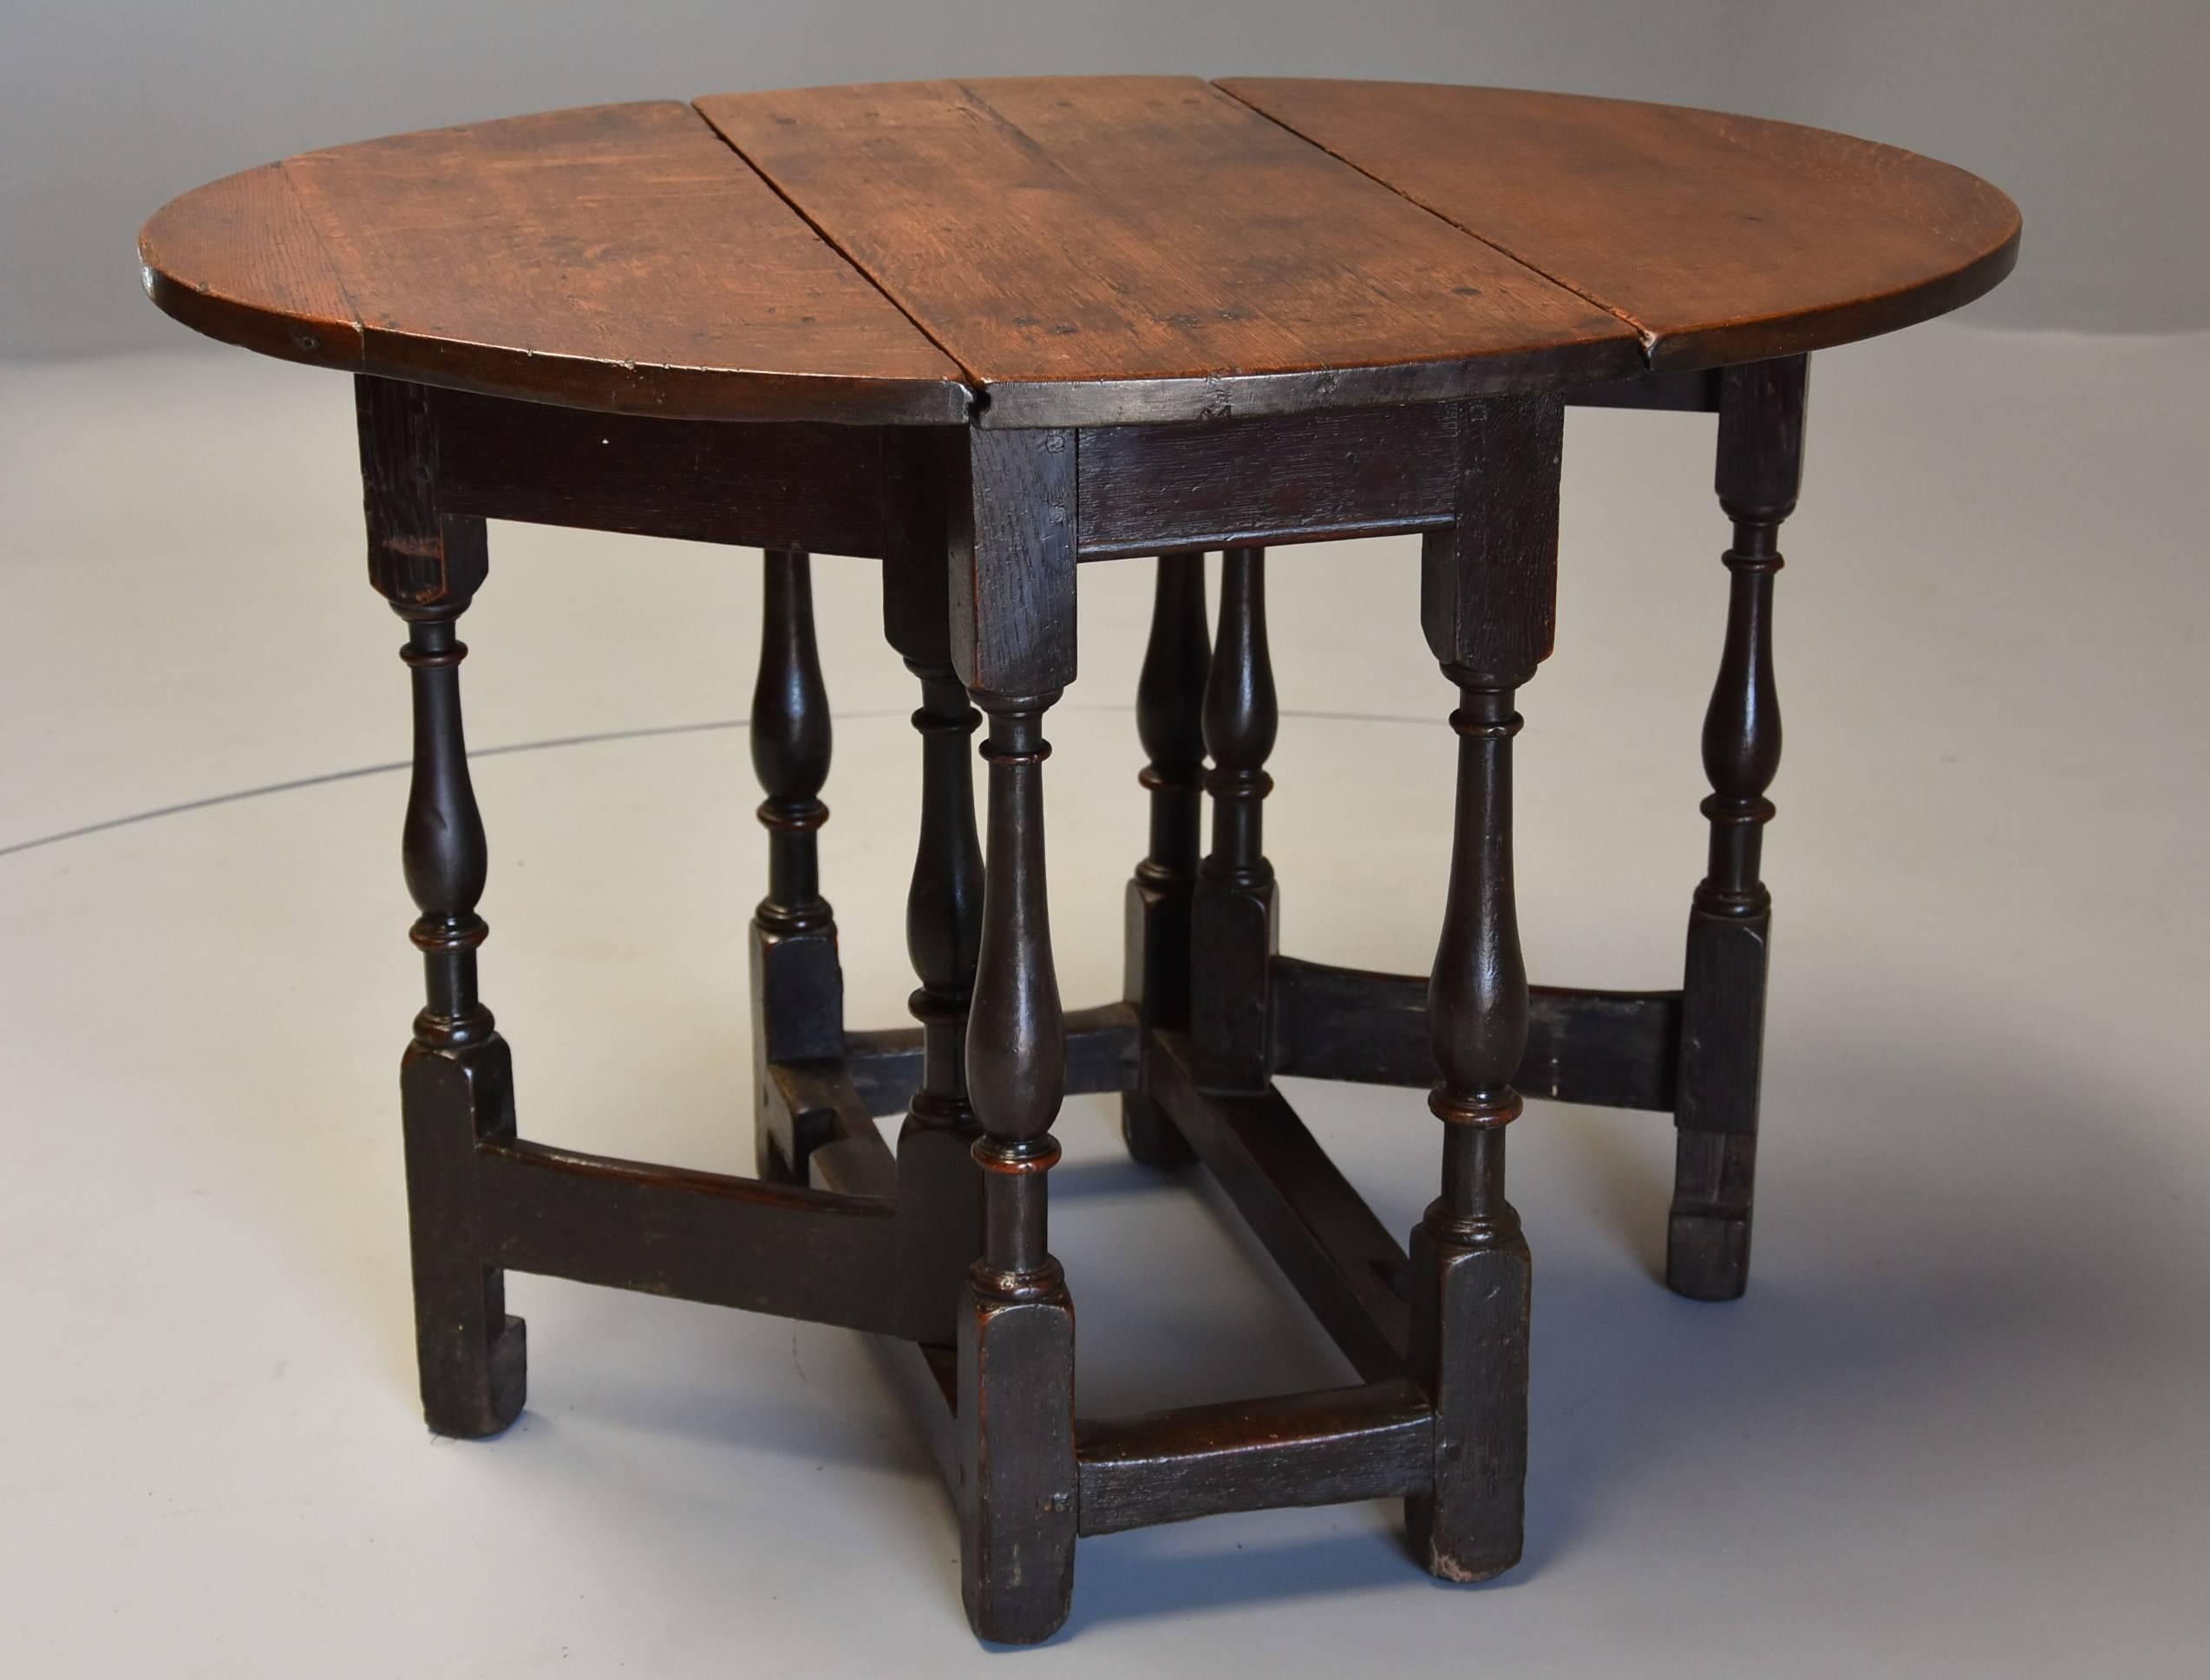 A late 17th century oak gateleg table of small proportions and good patina (color).

This table consists of an oak oval plank top of good color supported by finely turned legs and oak stretchers and would comfortably seat four.

This gateleg